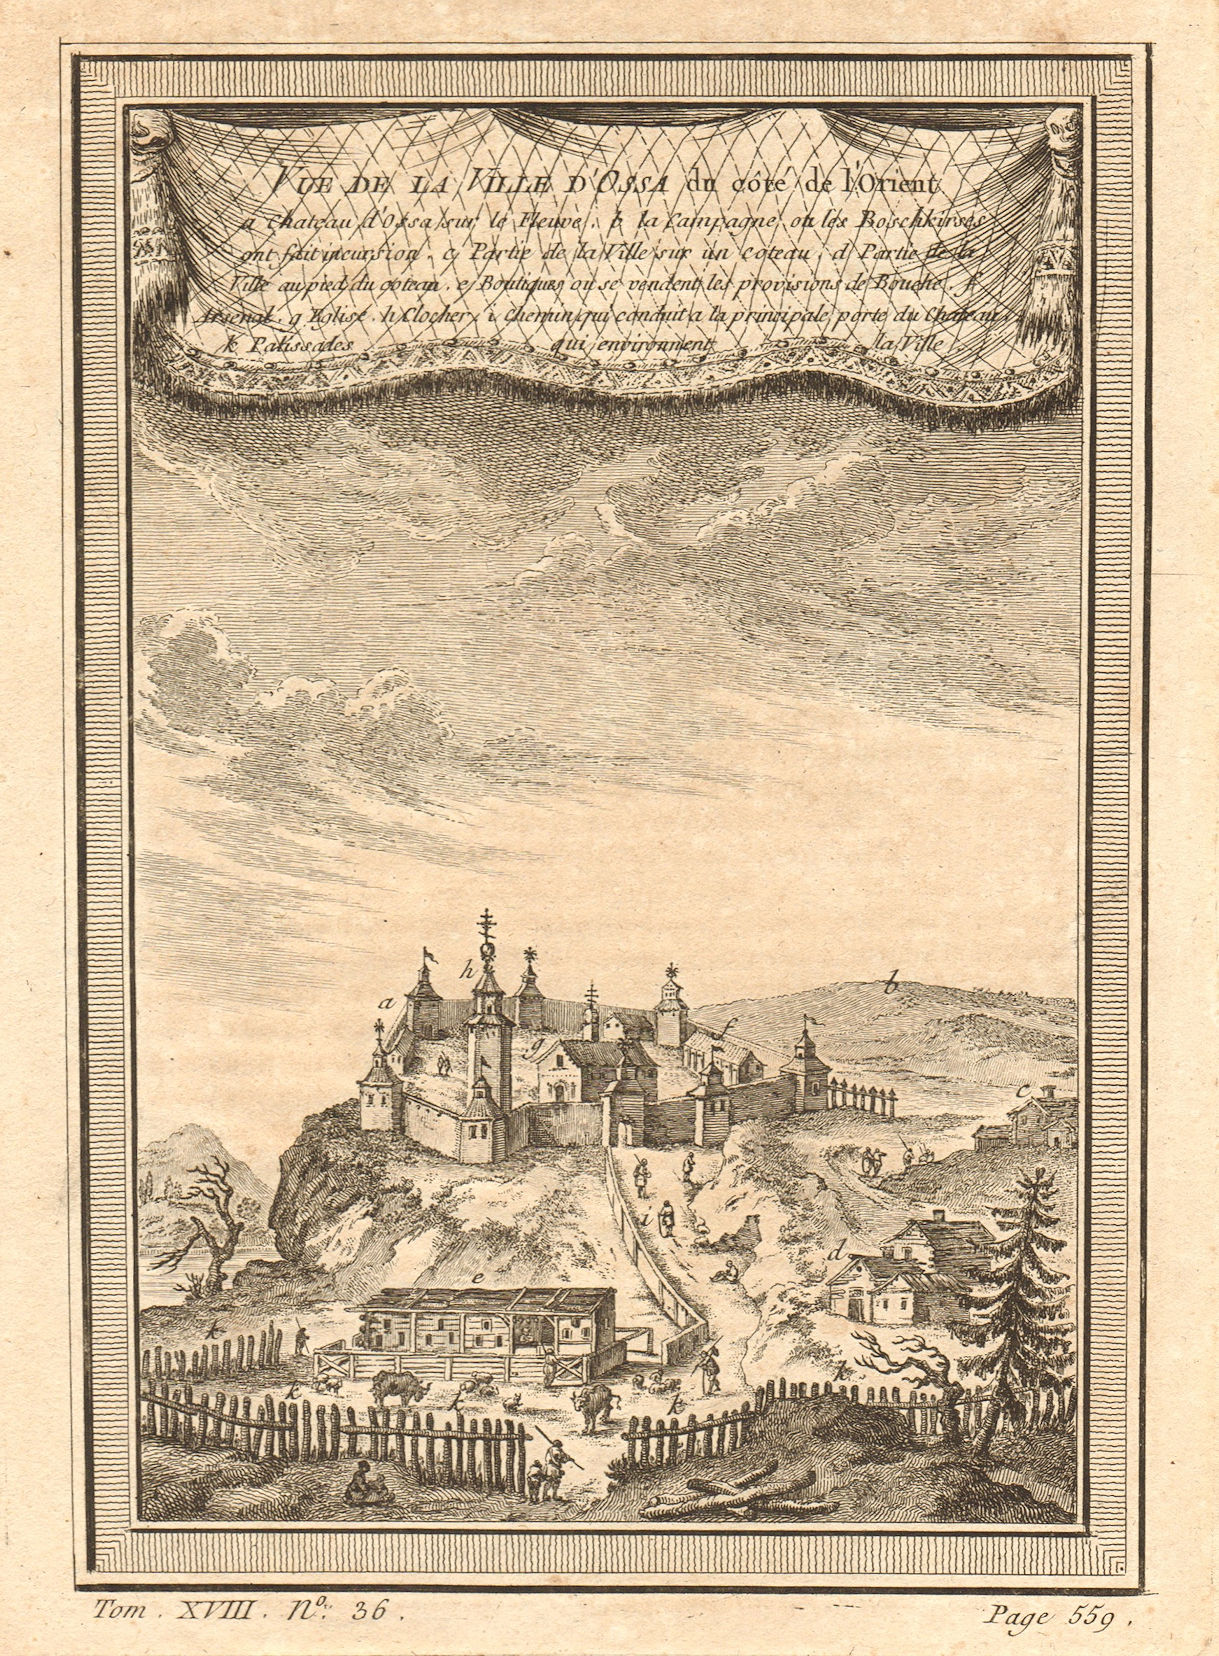 Associate Product View of the town of Osa, Perm Krai, from the east side. Siberia, Russia 1768